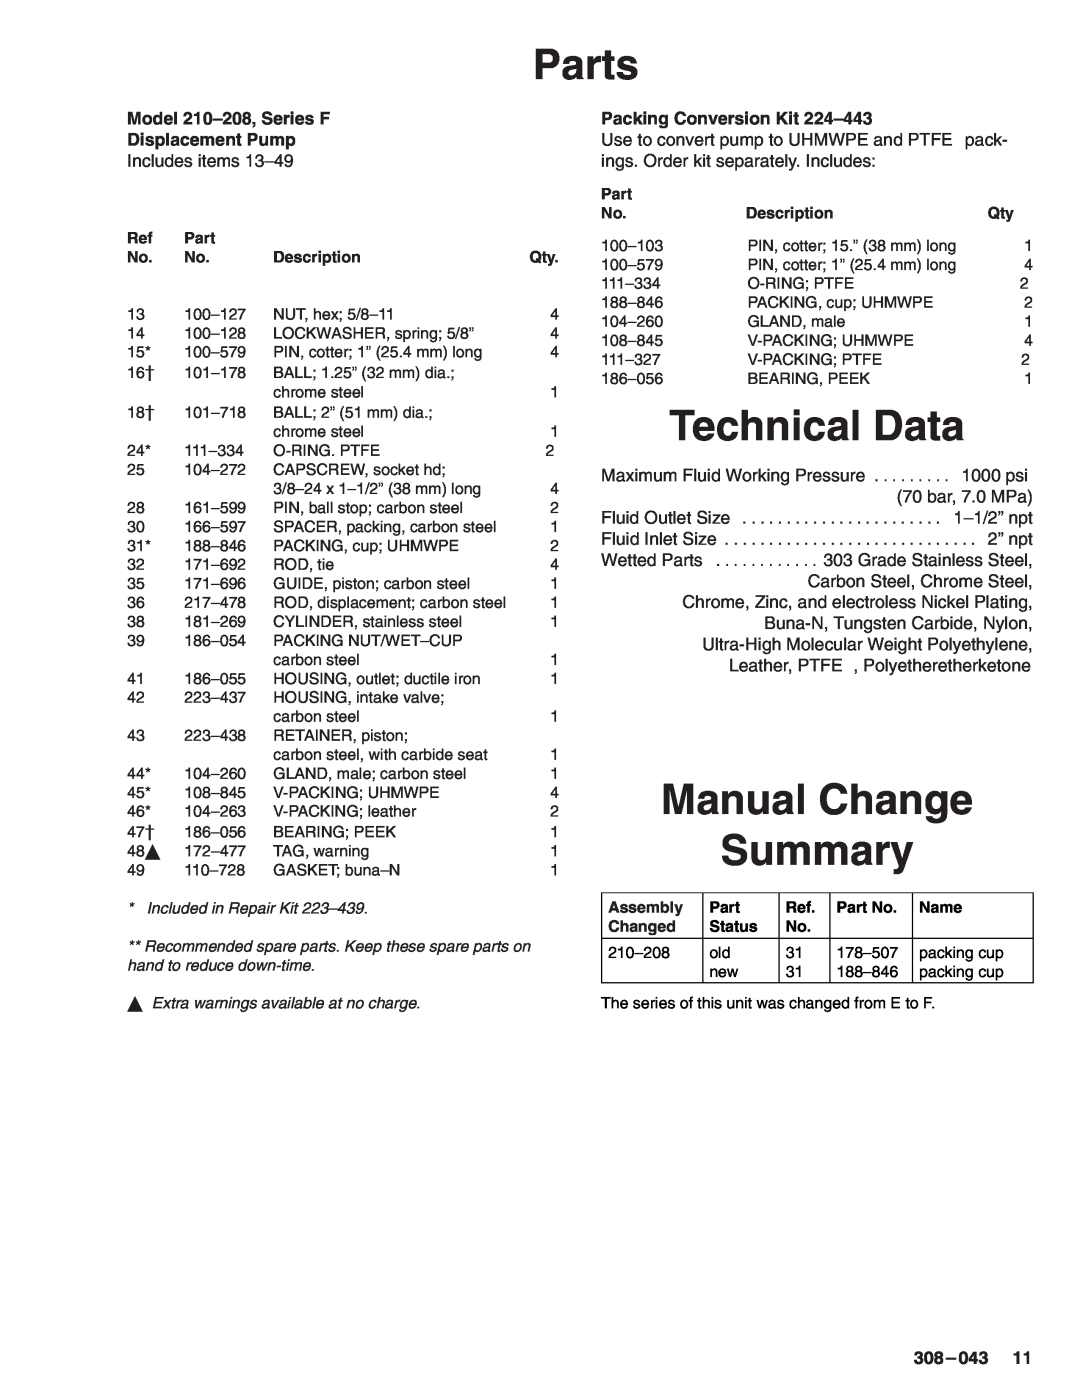 Hitachi Technical Data, Manual Change Summary, Model 210-208,Series F Displacement Pump, Packing Conversion Kit, Parts 